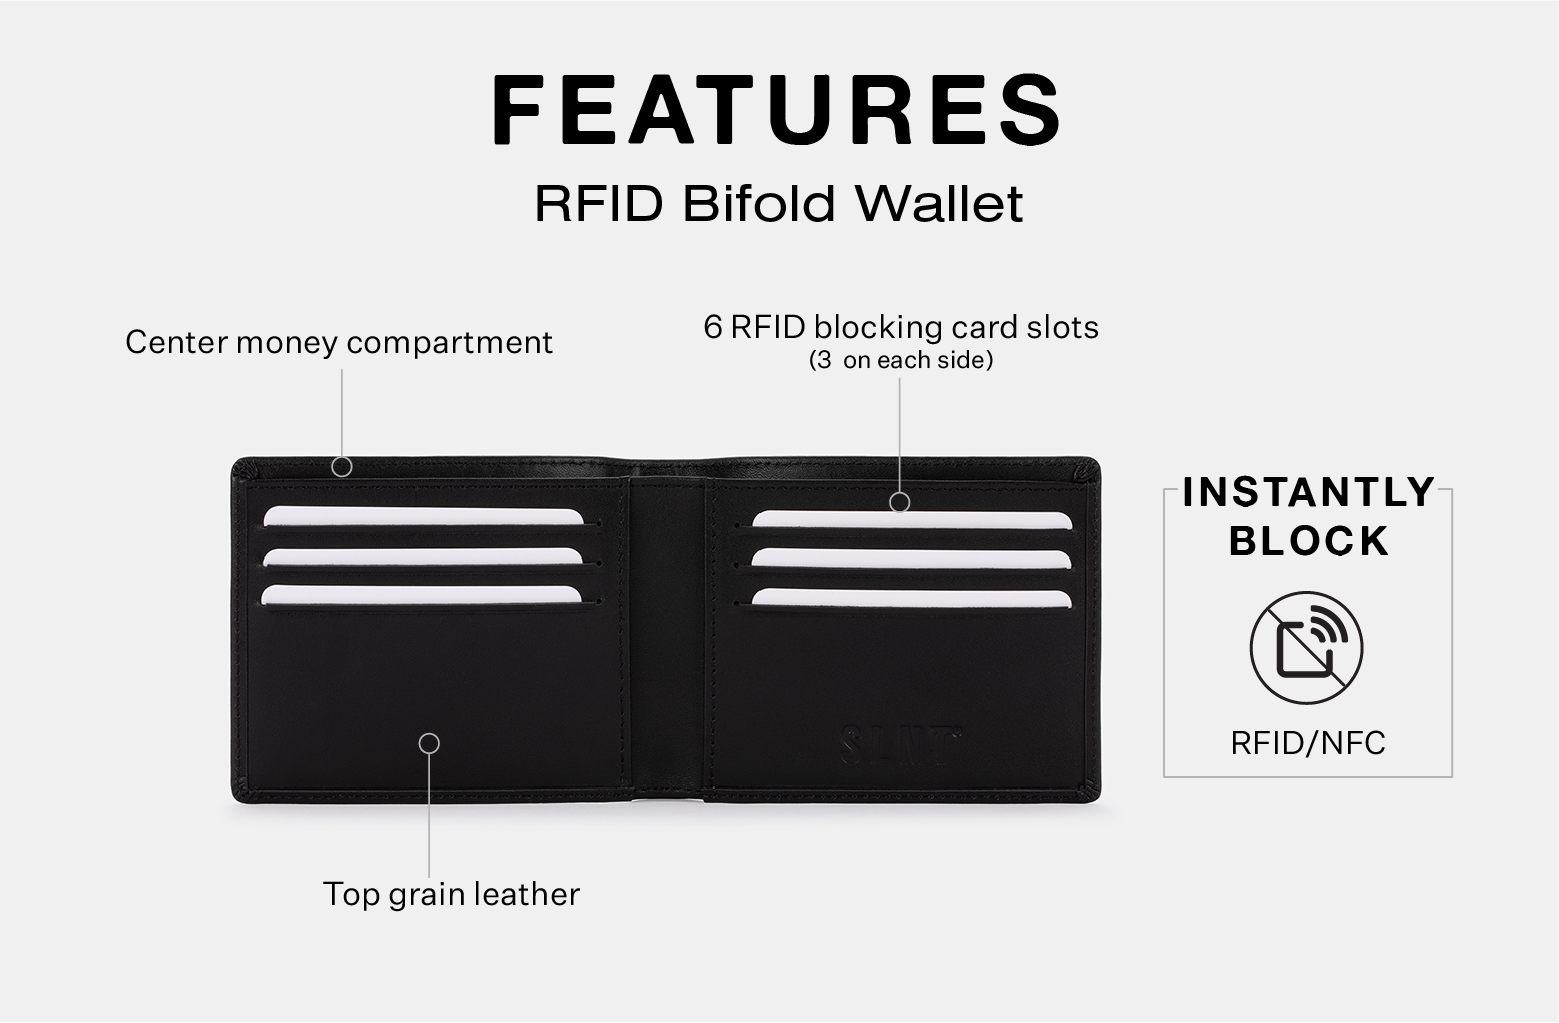 RFID Blocking find out what the best blocking technologies are today!